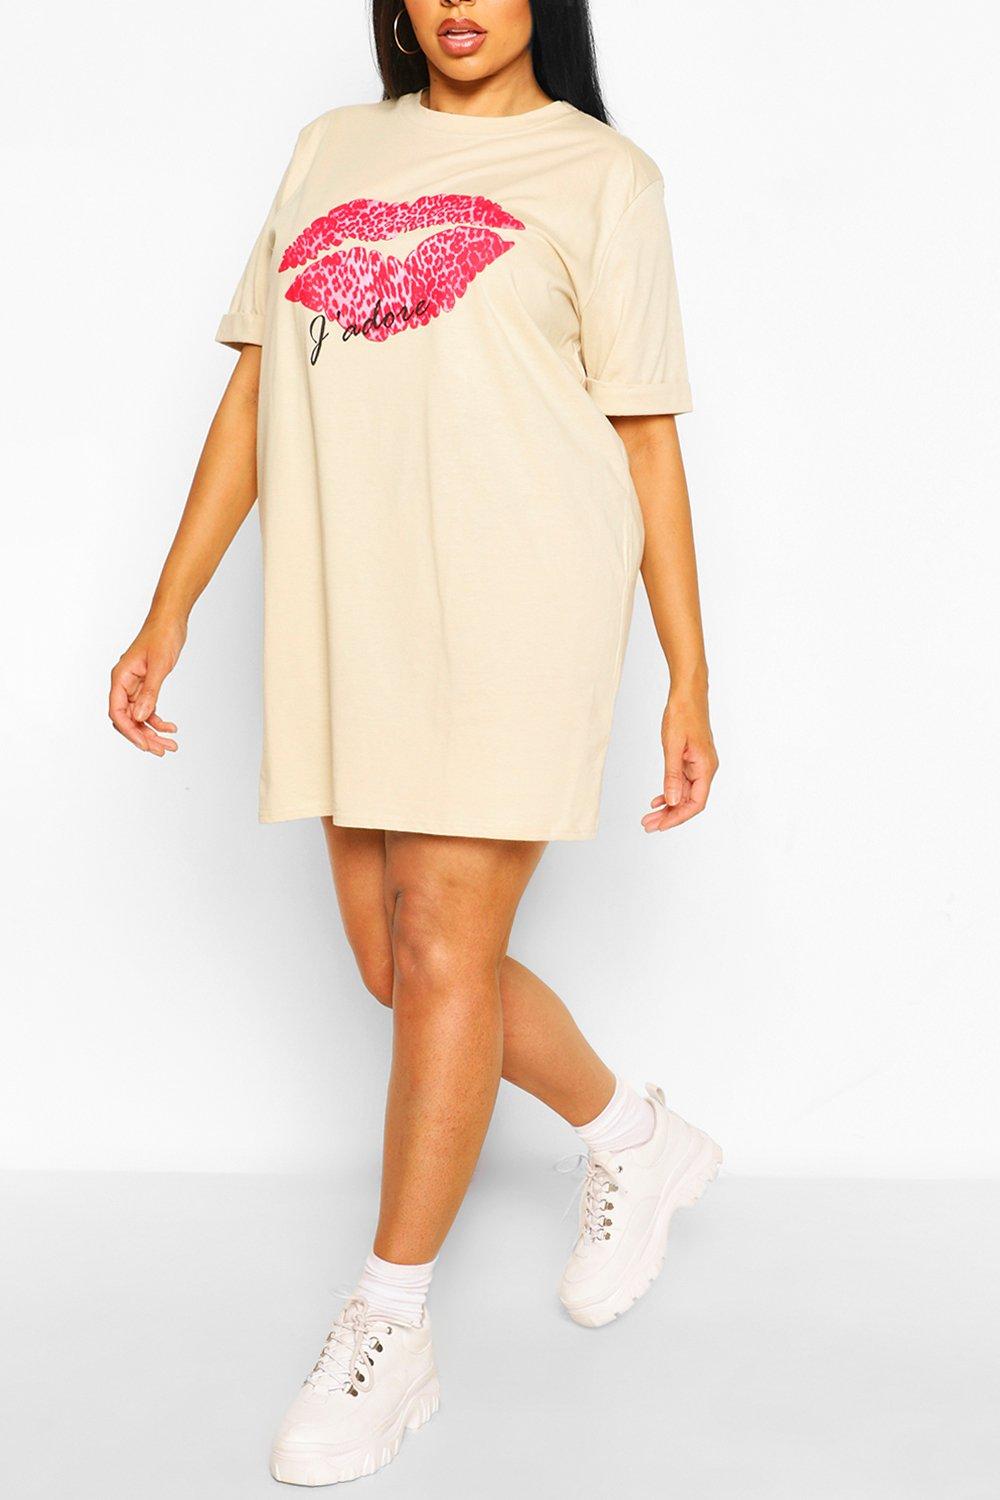 Grande taille - Robe t-shirt J'adore ...